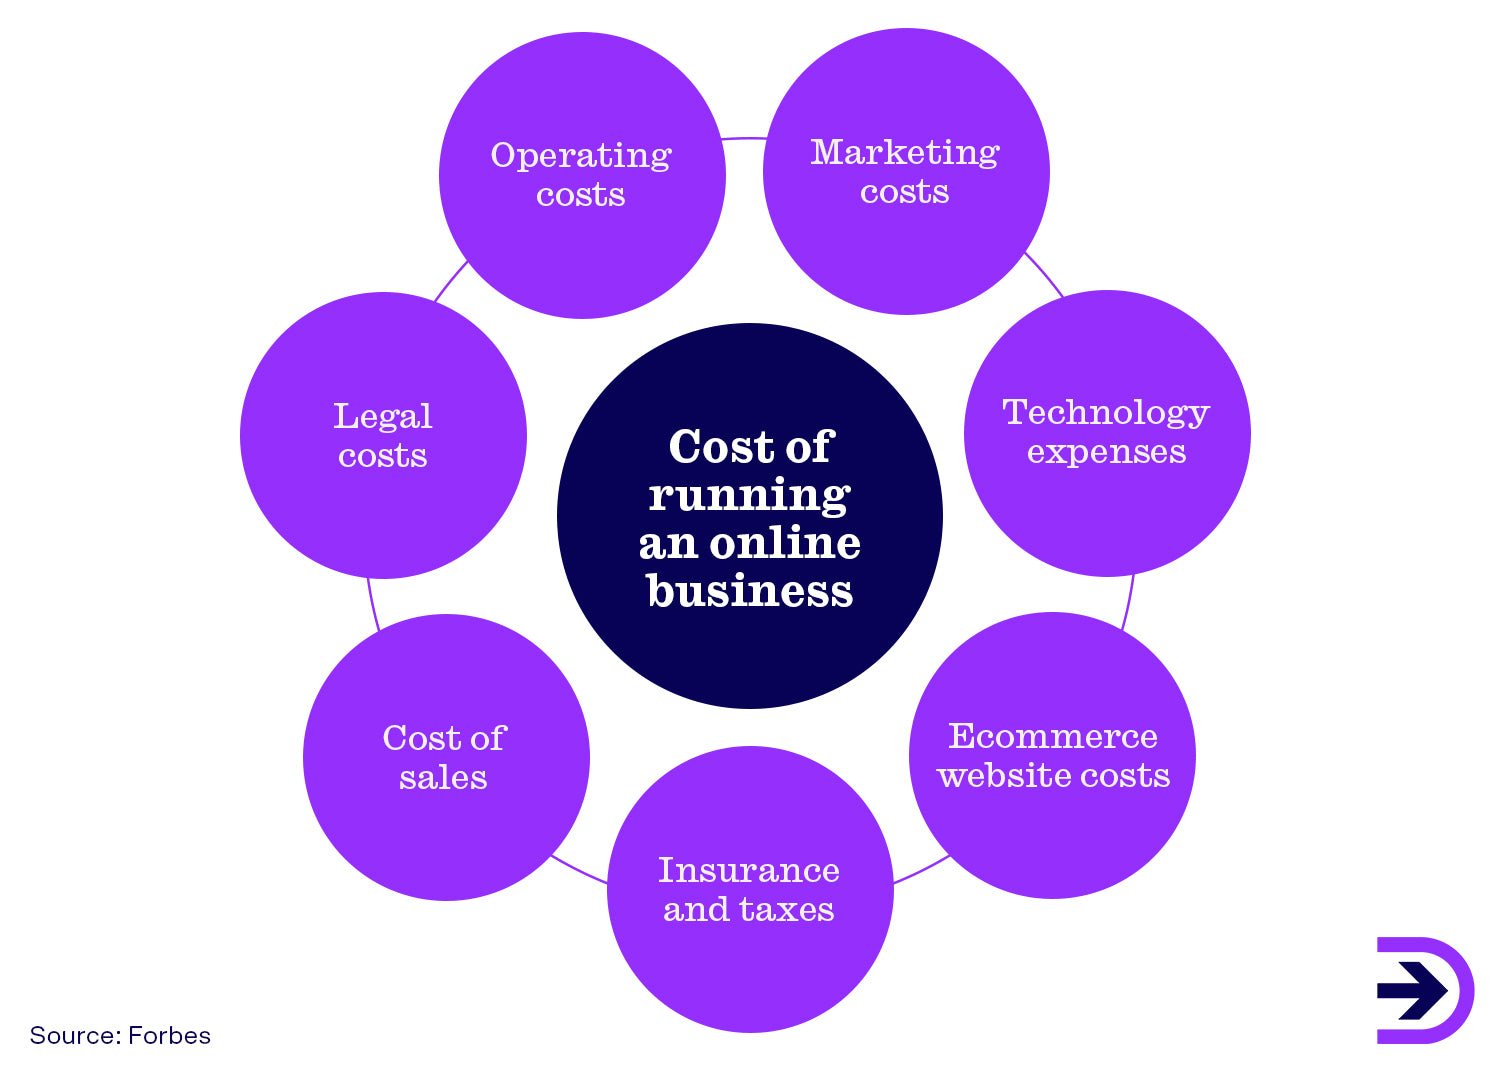 There are many costs if running an online business such as website costs and marketing expenses.